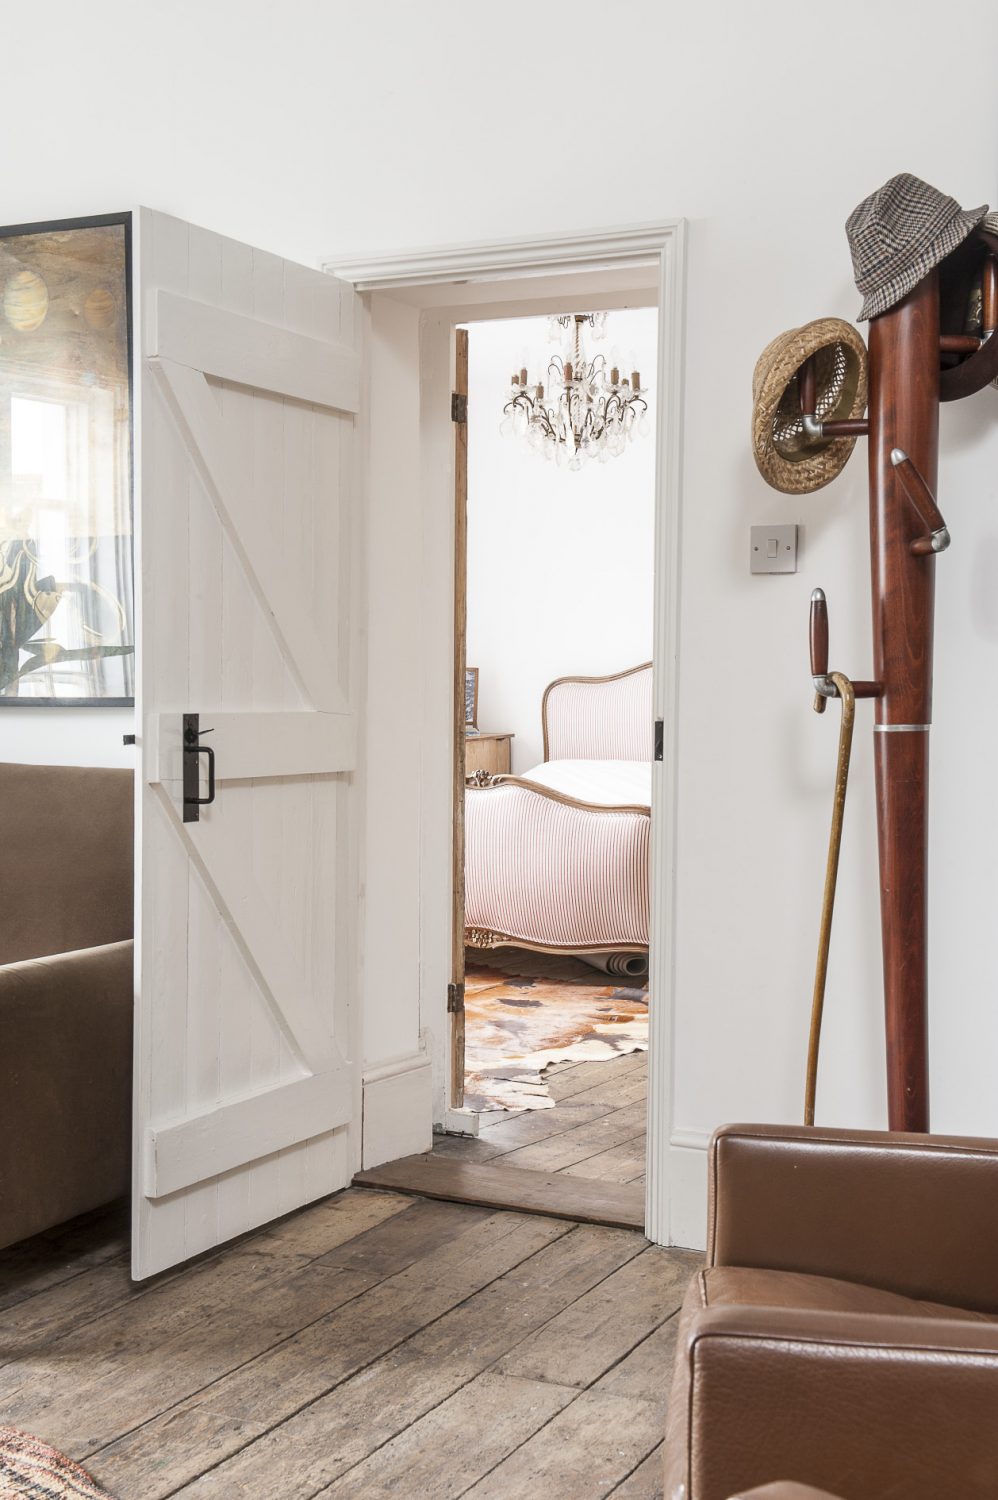 A door from the living room leads into the master bedroom. Rob has seamlessly combined an eclectic mix of contemporary and antique in each room